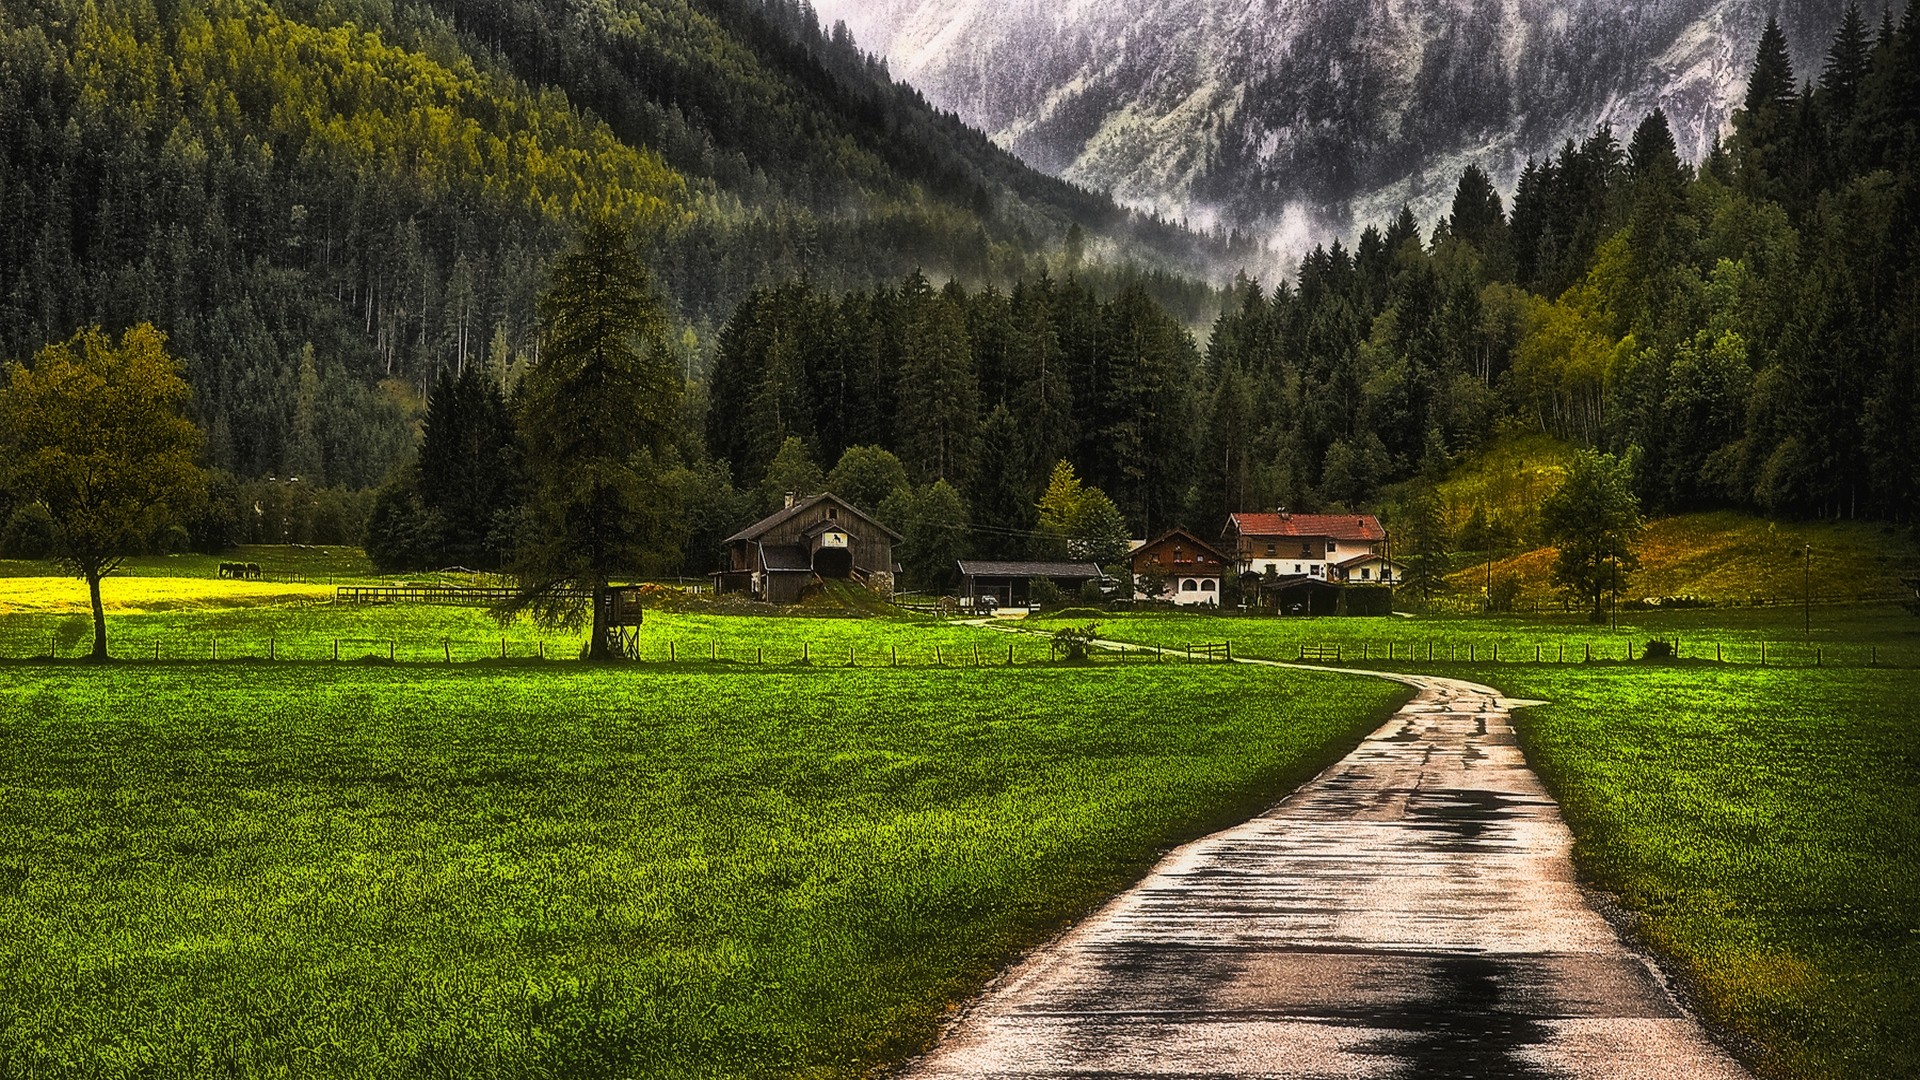 General 1920x1080 nature landscape mountains forest farm grass snow fence mist trees barns dirt road path